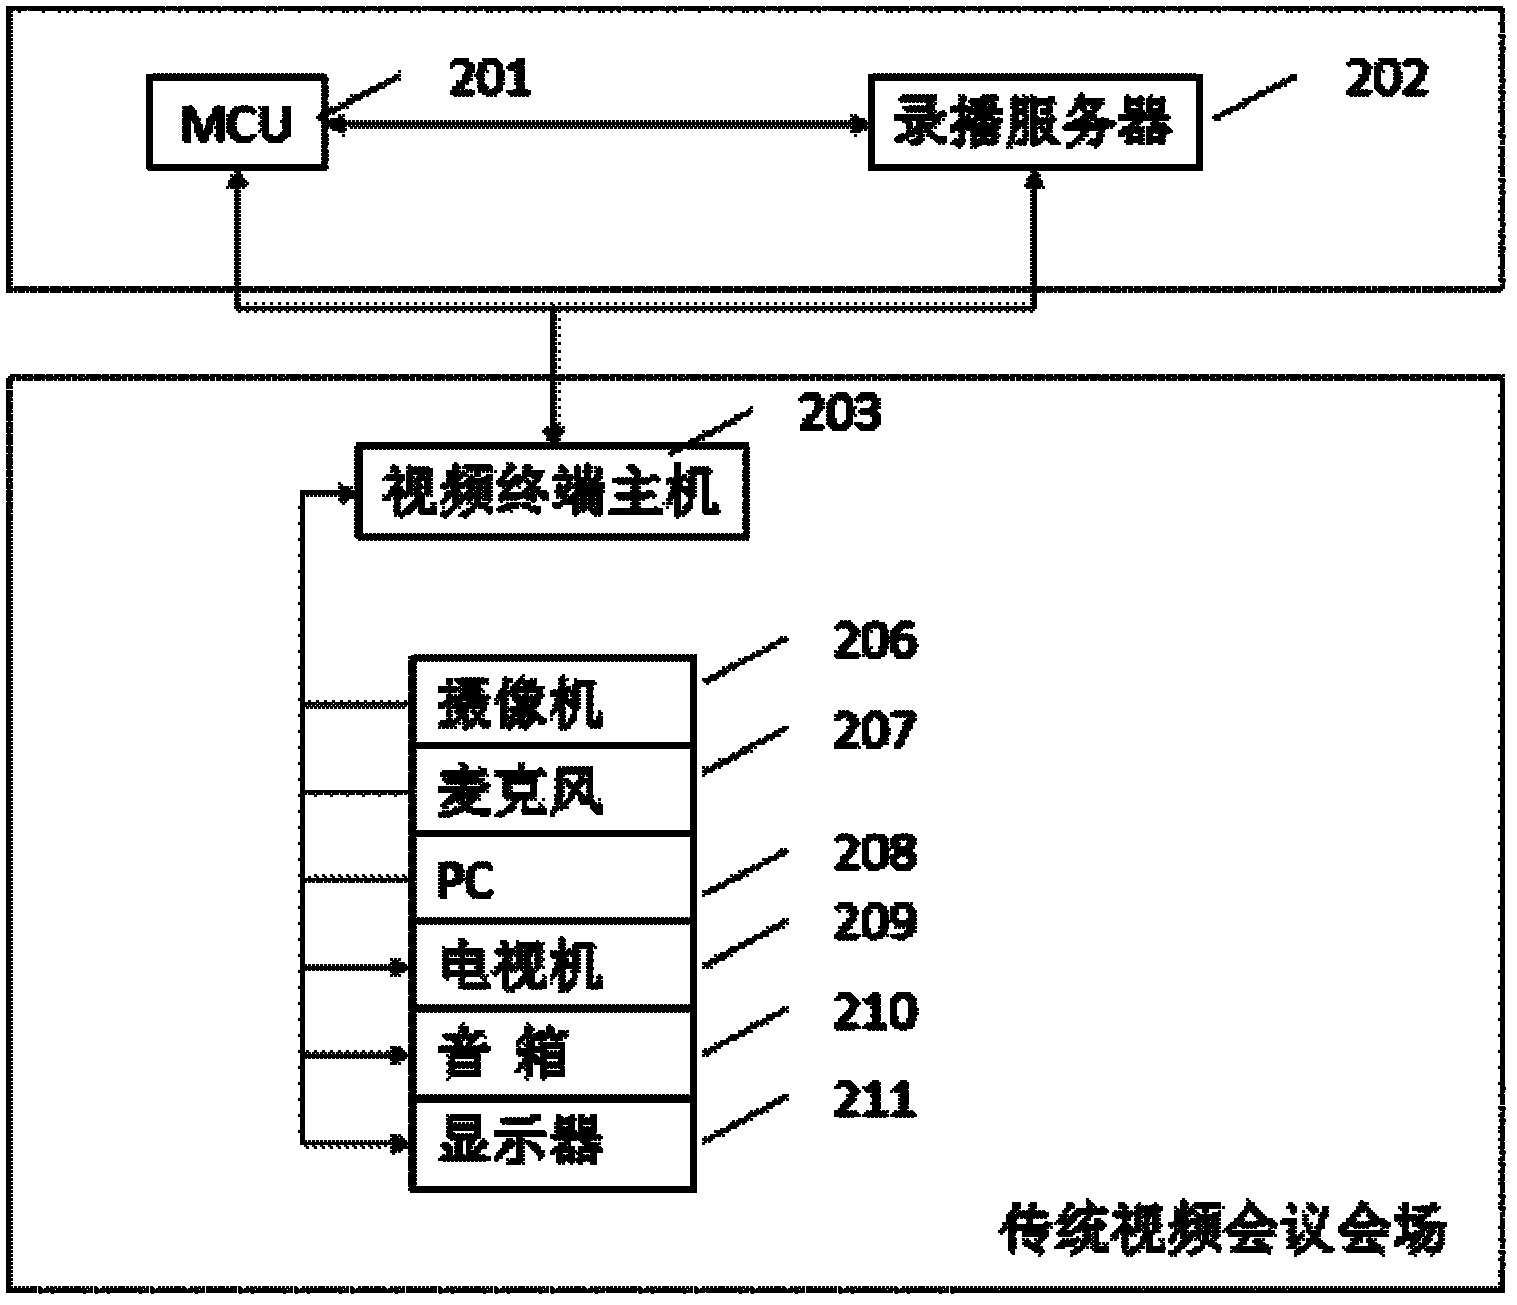 Remote presentation meeting system and method for recording and replaying remote presentation meeting